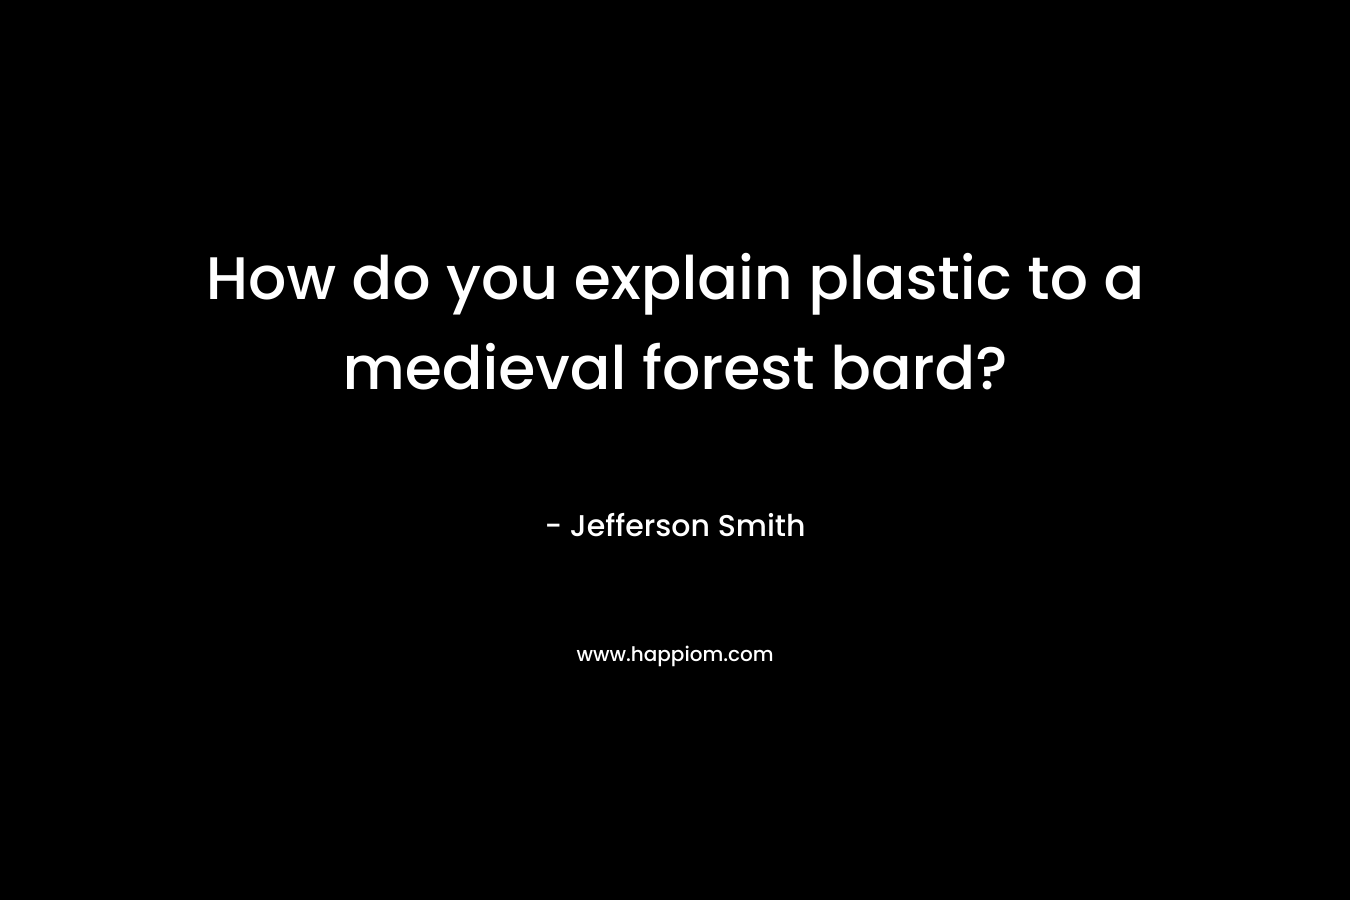 How do you explain plastic to a medieval forest bard?